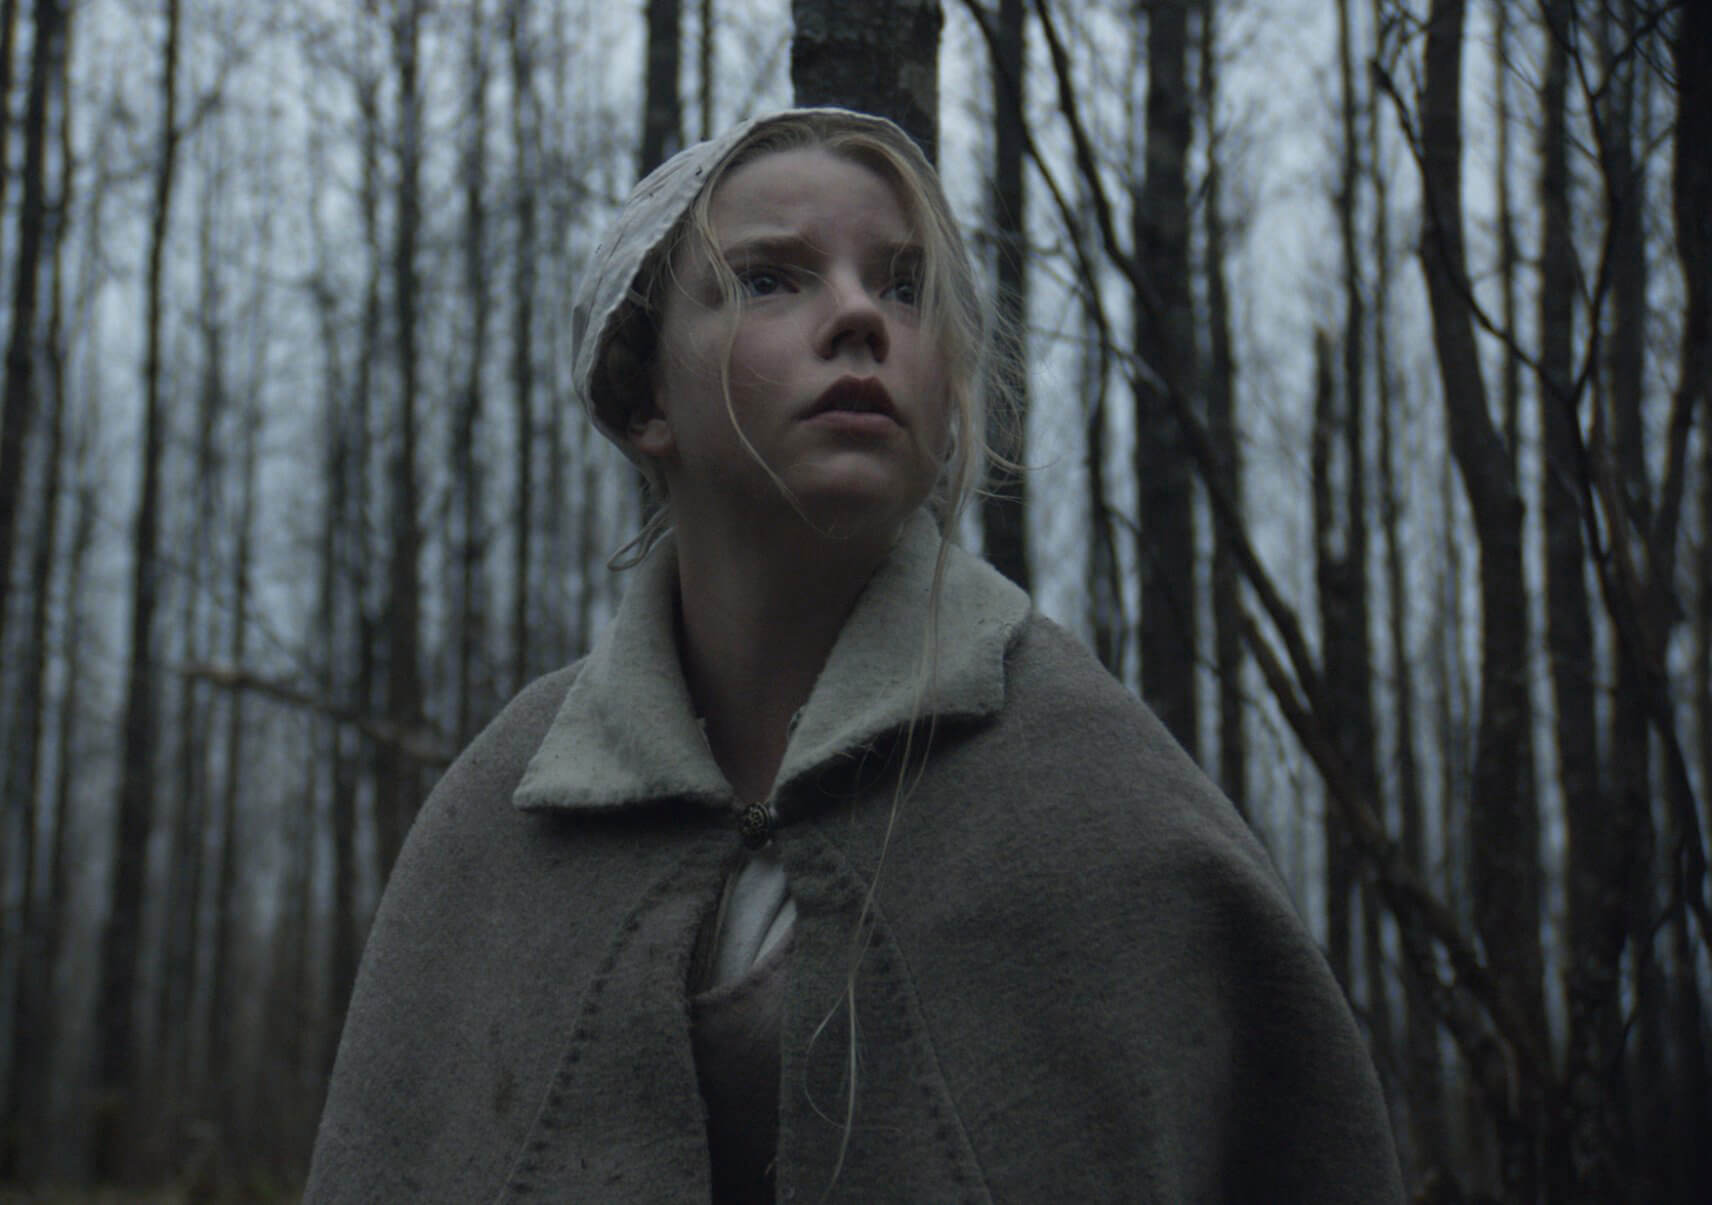 Video still from The Witch